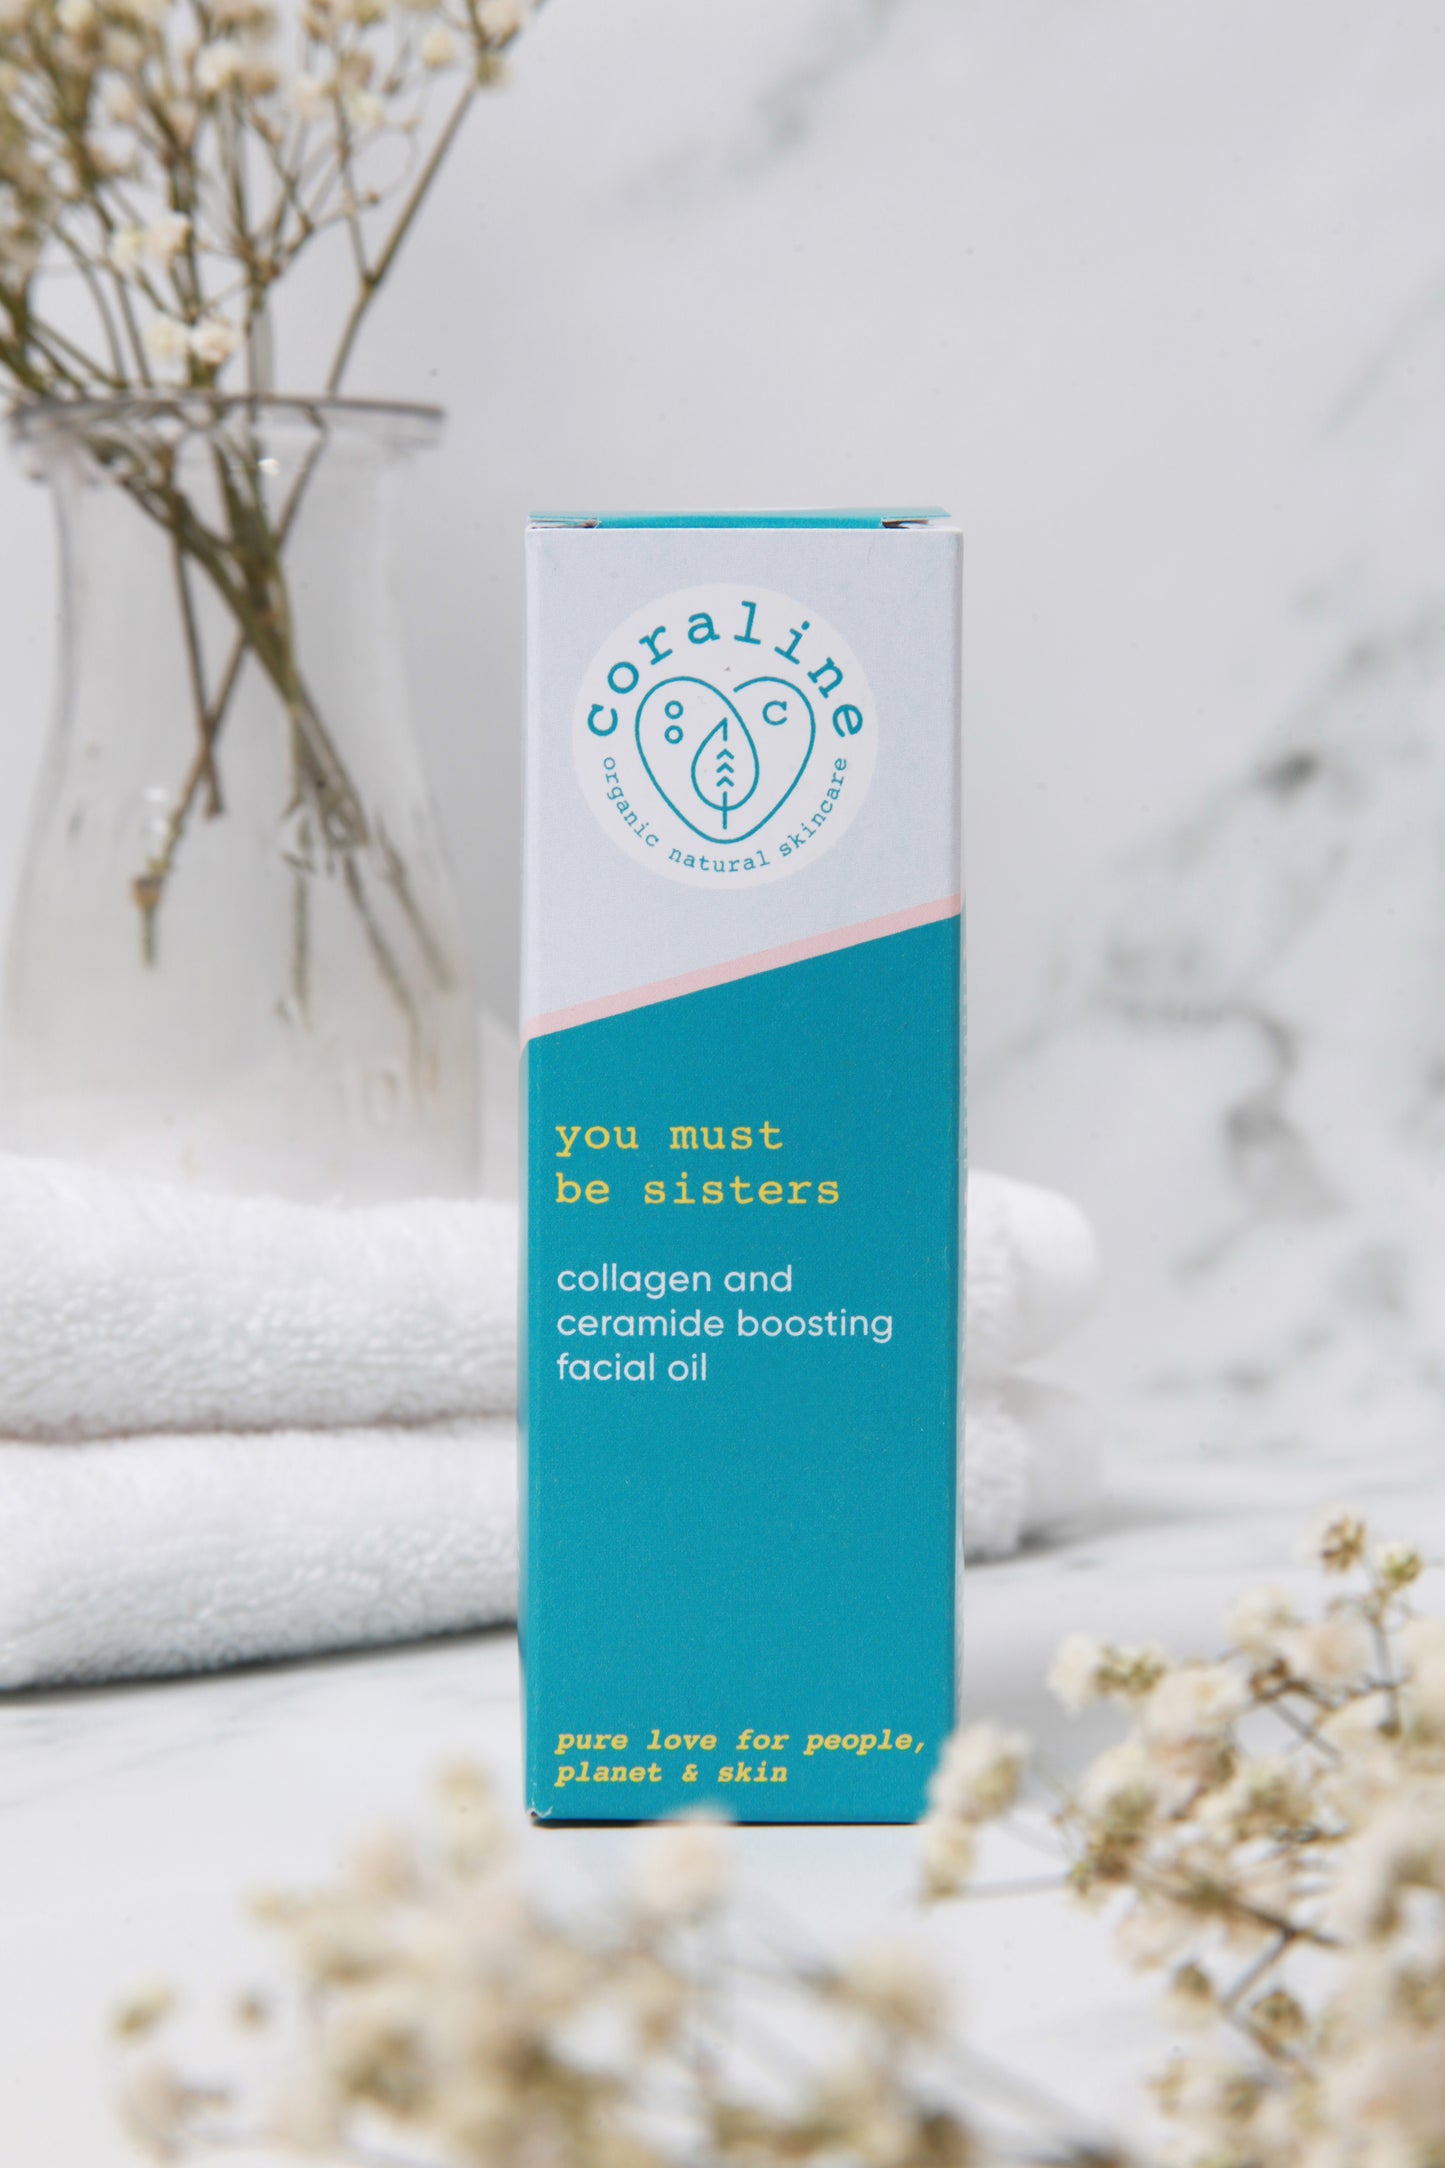 A box of "You Must Be Sisters" facial oil stands in its packaging on a marble surface. Behind them, white towels and delicate baby's breath flowers in a vase. The flowers are blurred out in the foreground too.